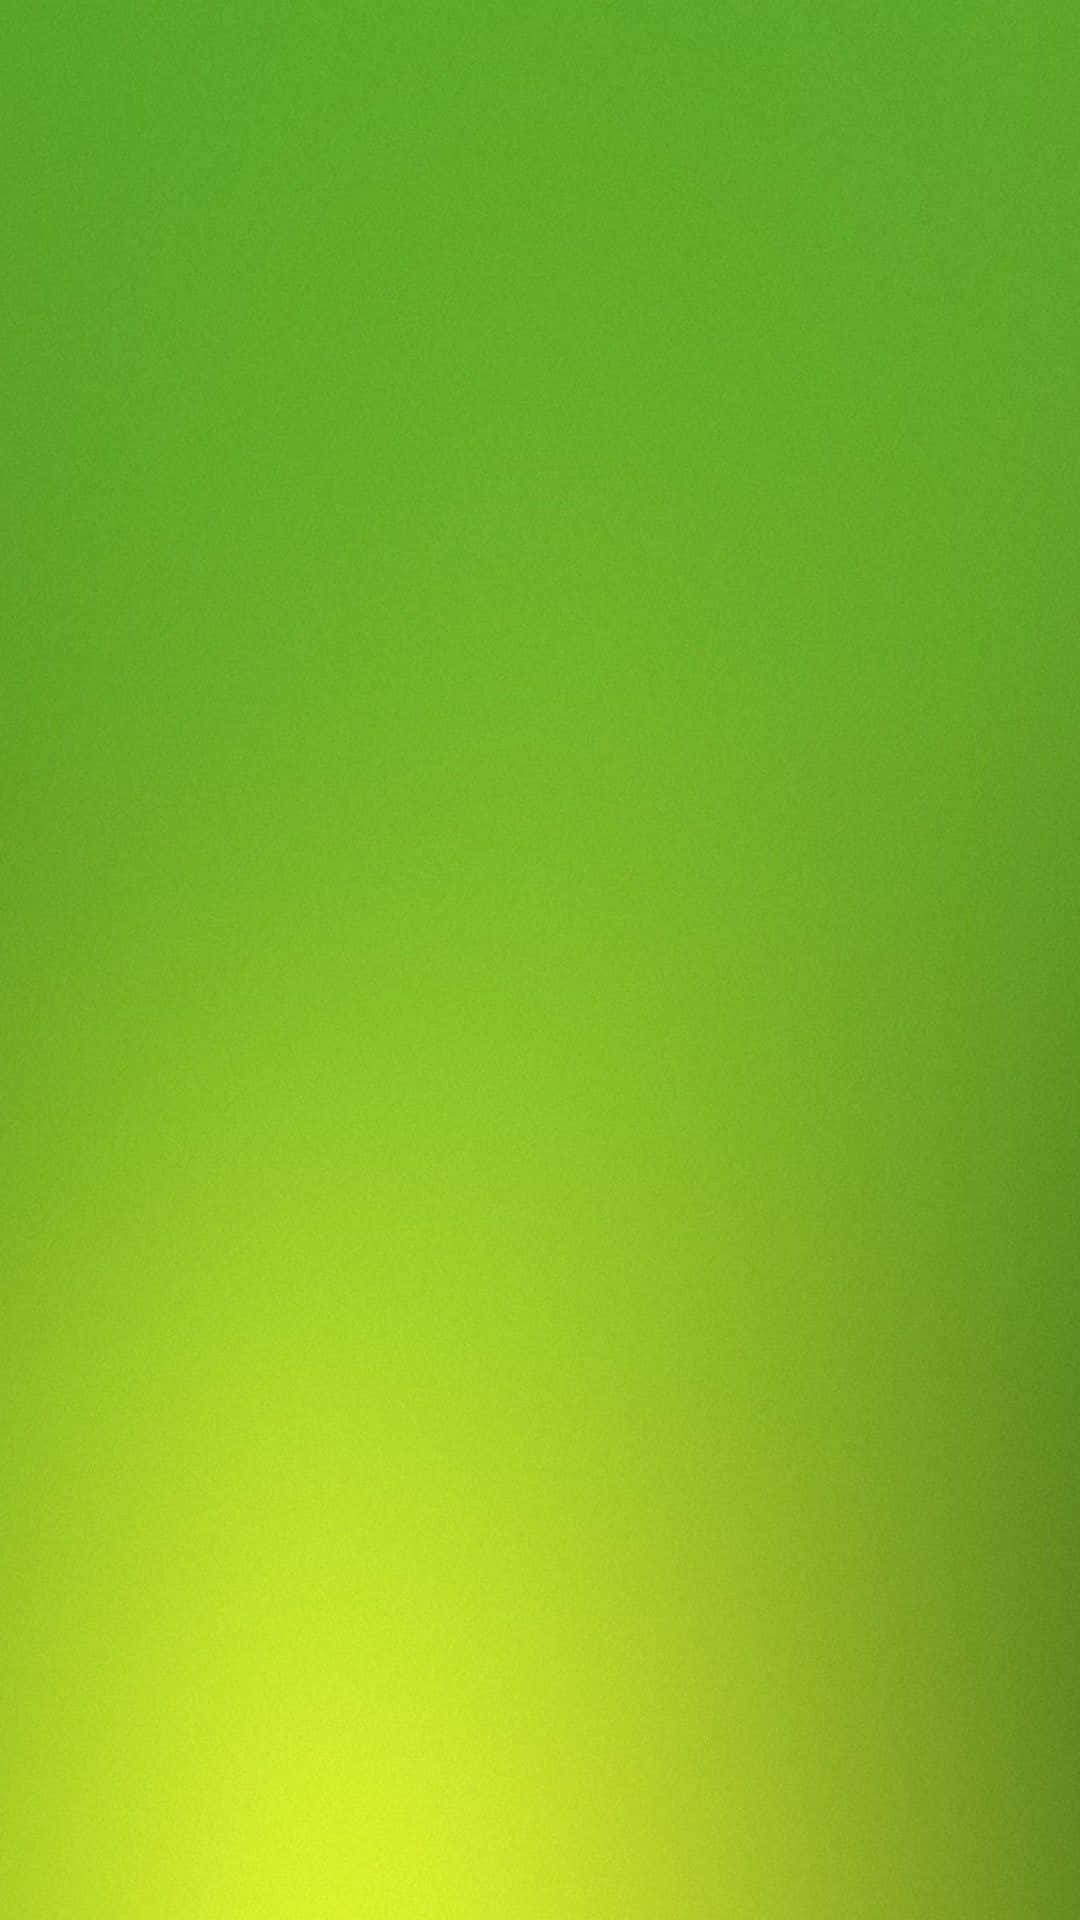 Captivating Lime Green Textured Background Wallpaper